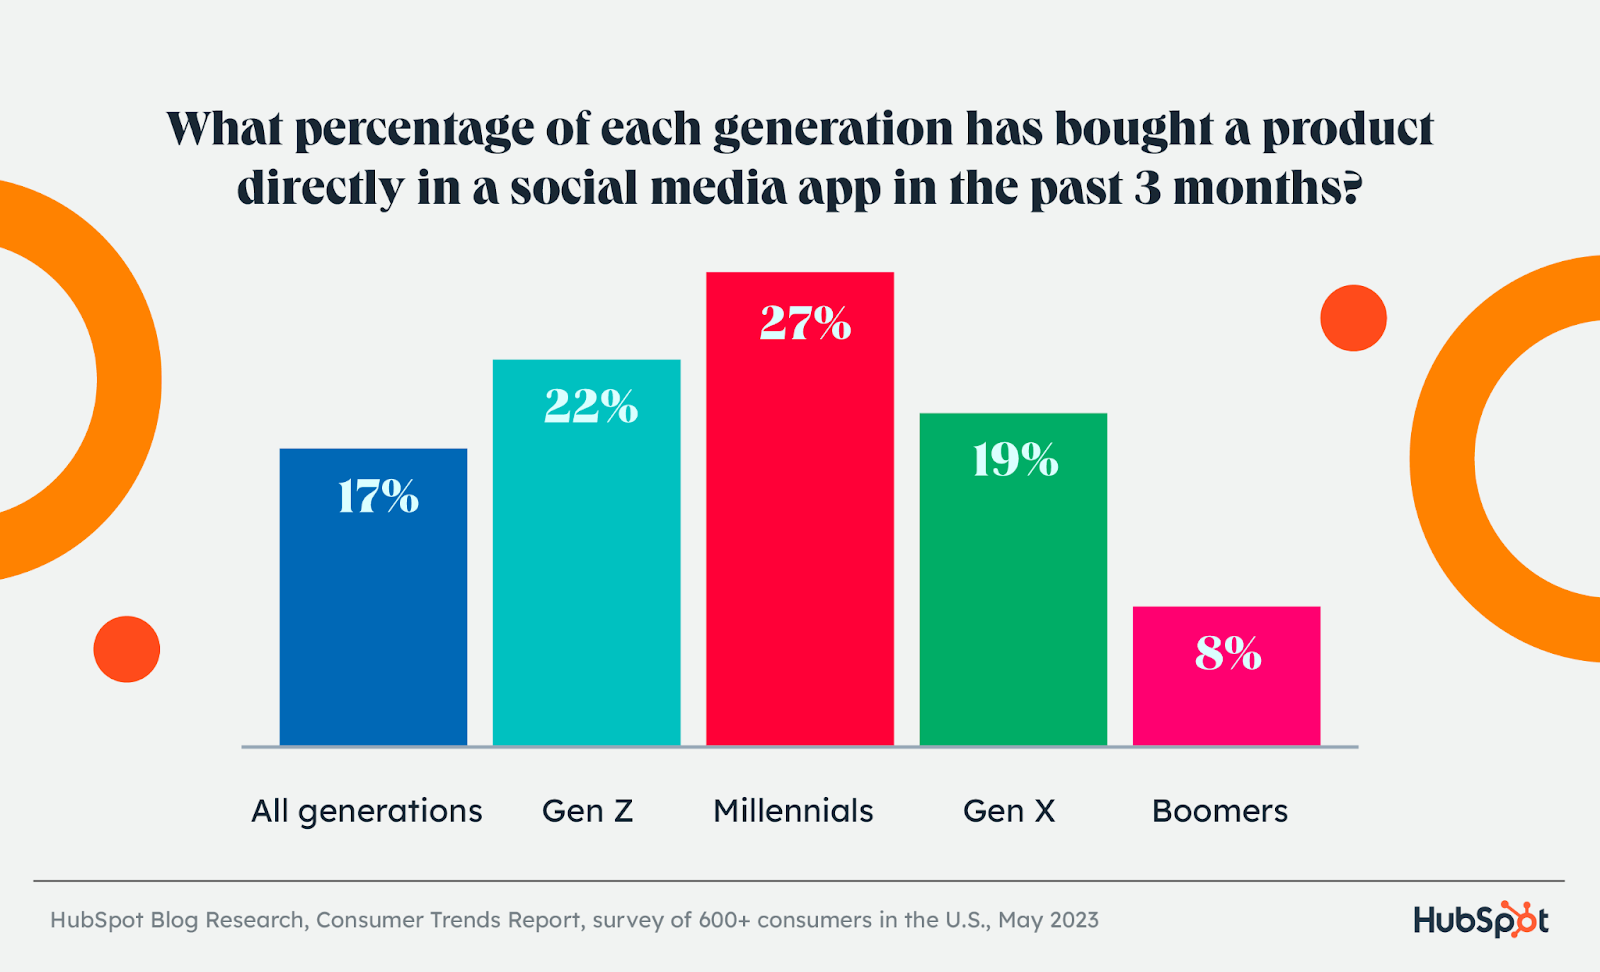 graph displaying the percentage of each generation that shops on social media